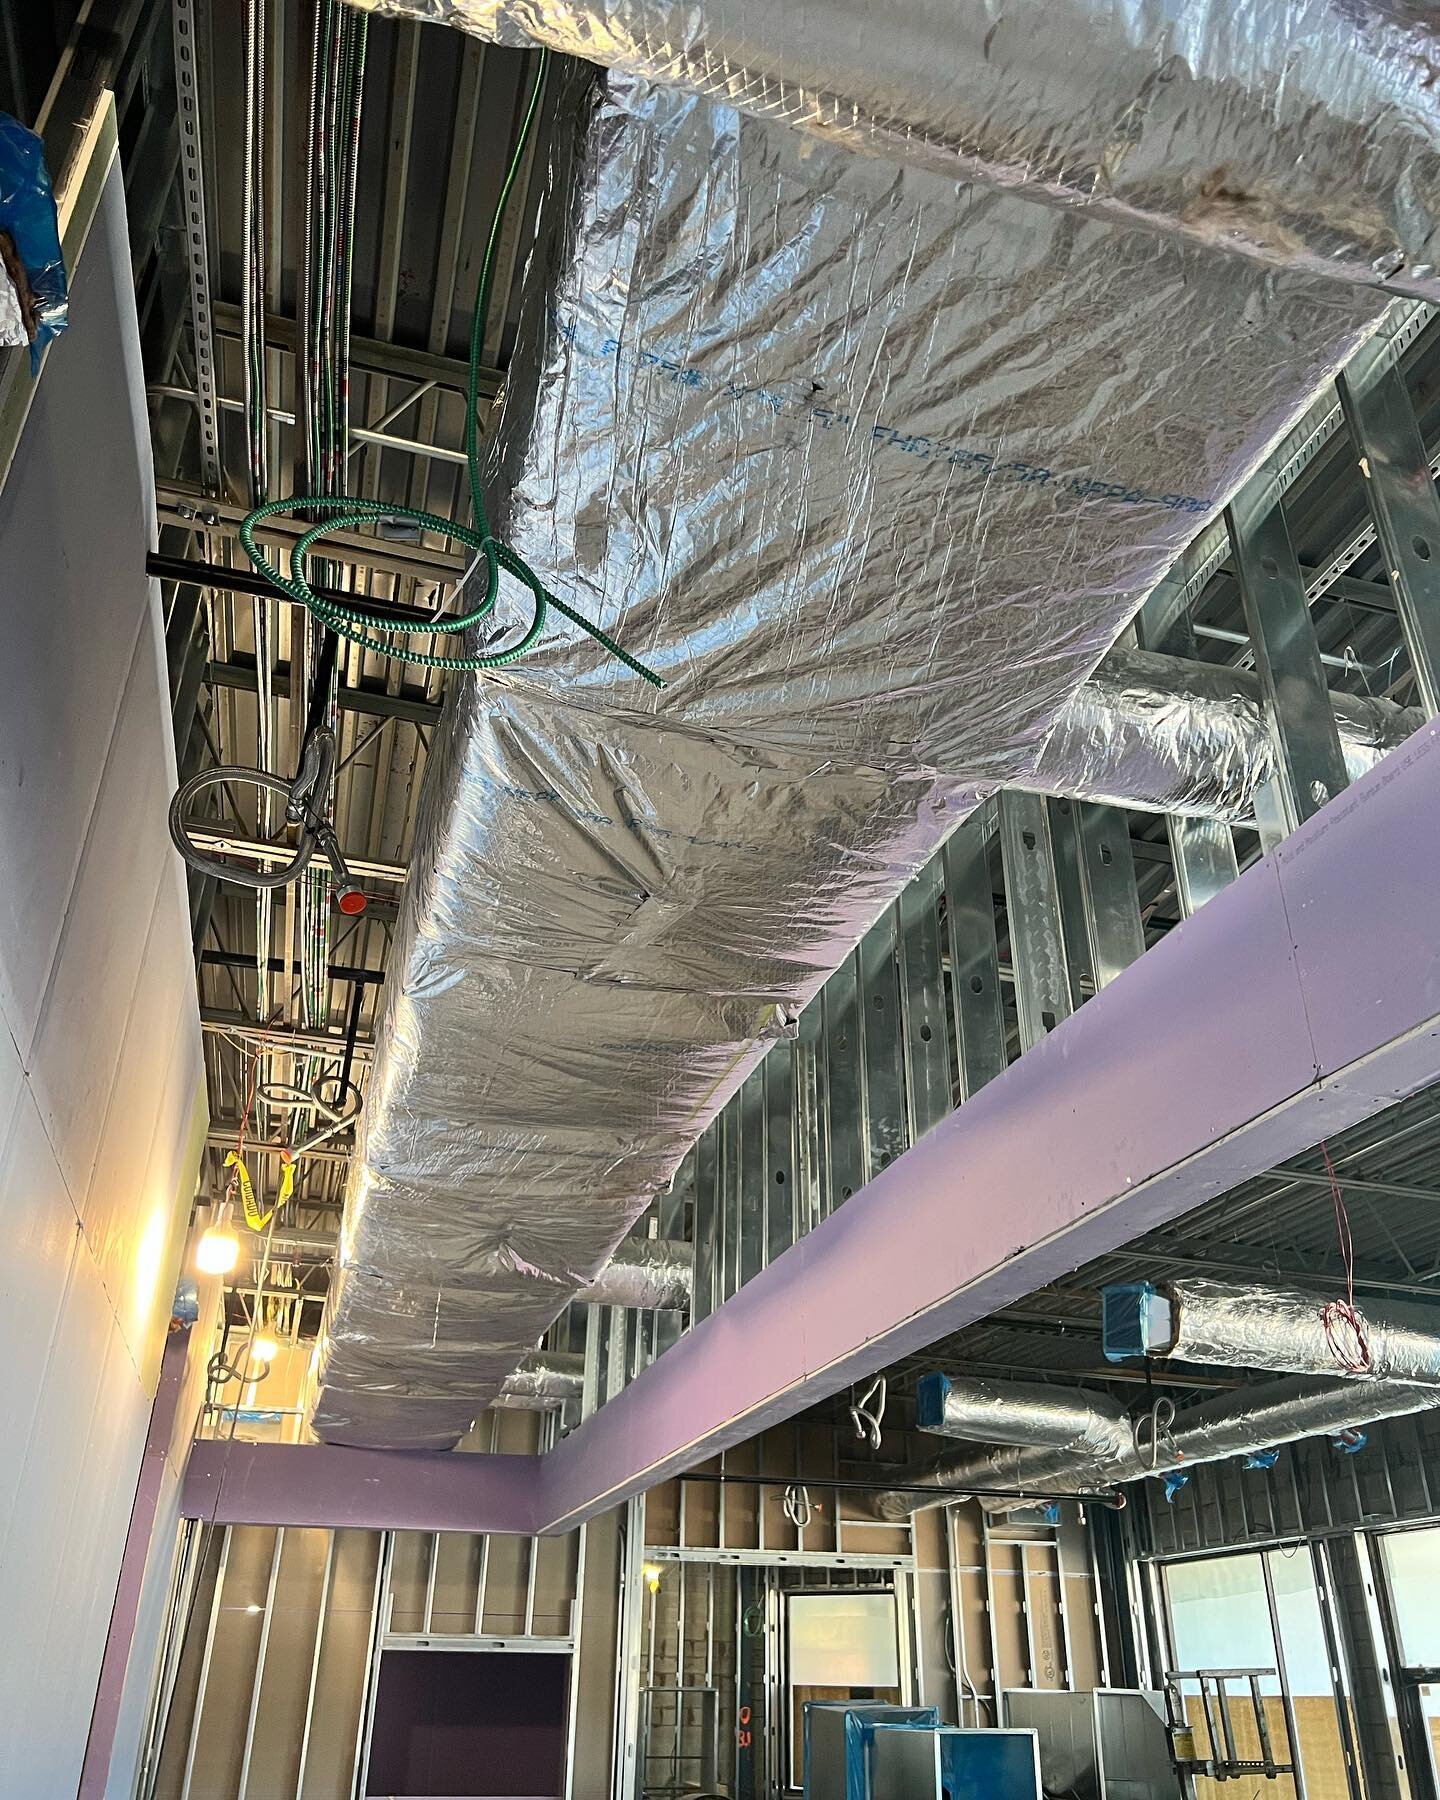 Camfred&rsquo;s outpatient fit-out project continues to push forward after passing all rough inspections&hellip;time to close walls!